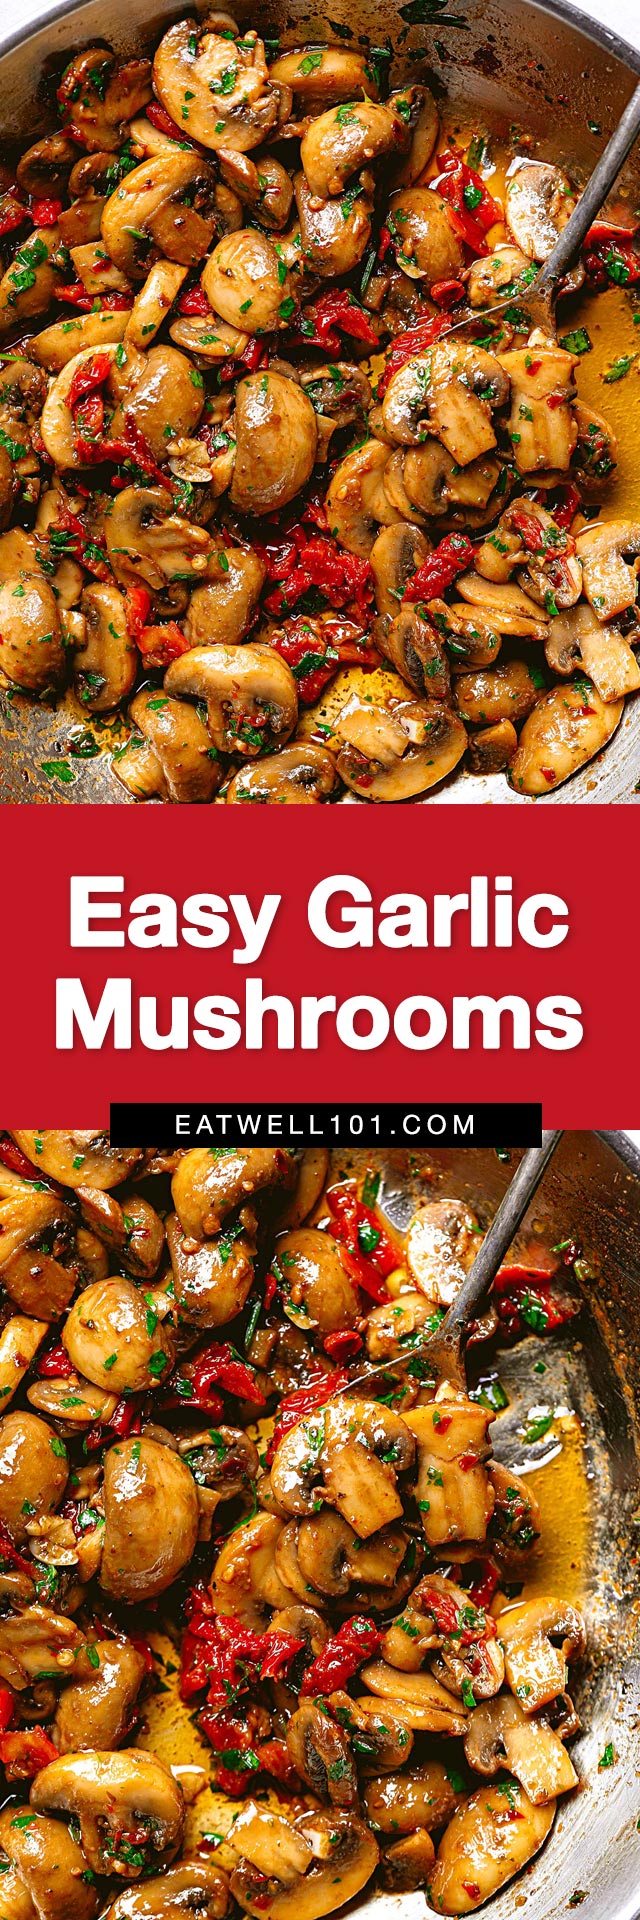 Garlic mushrooms - #mushroom #garlic. #recipe #eatwell101 - Incredible flavor twist! The herb garlic and sun-dried tomato butter sauce is so good, you’ll be serving these garlic mushrooms with everything!